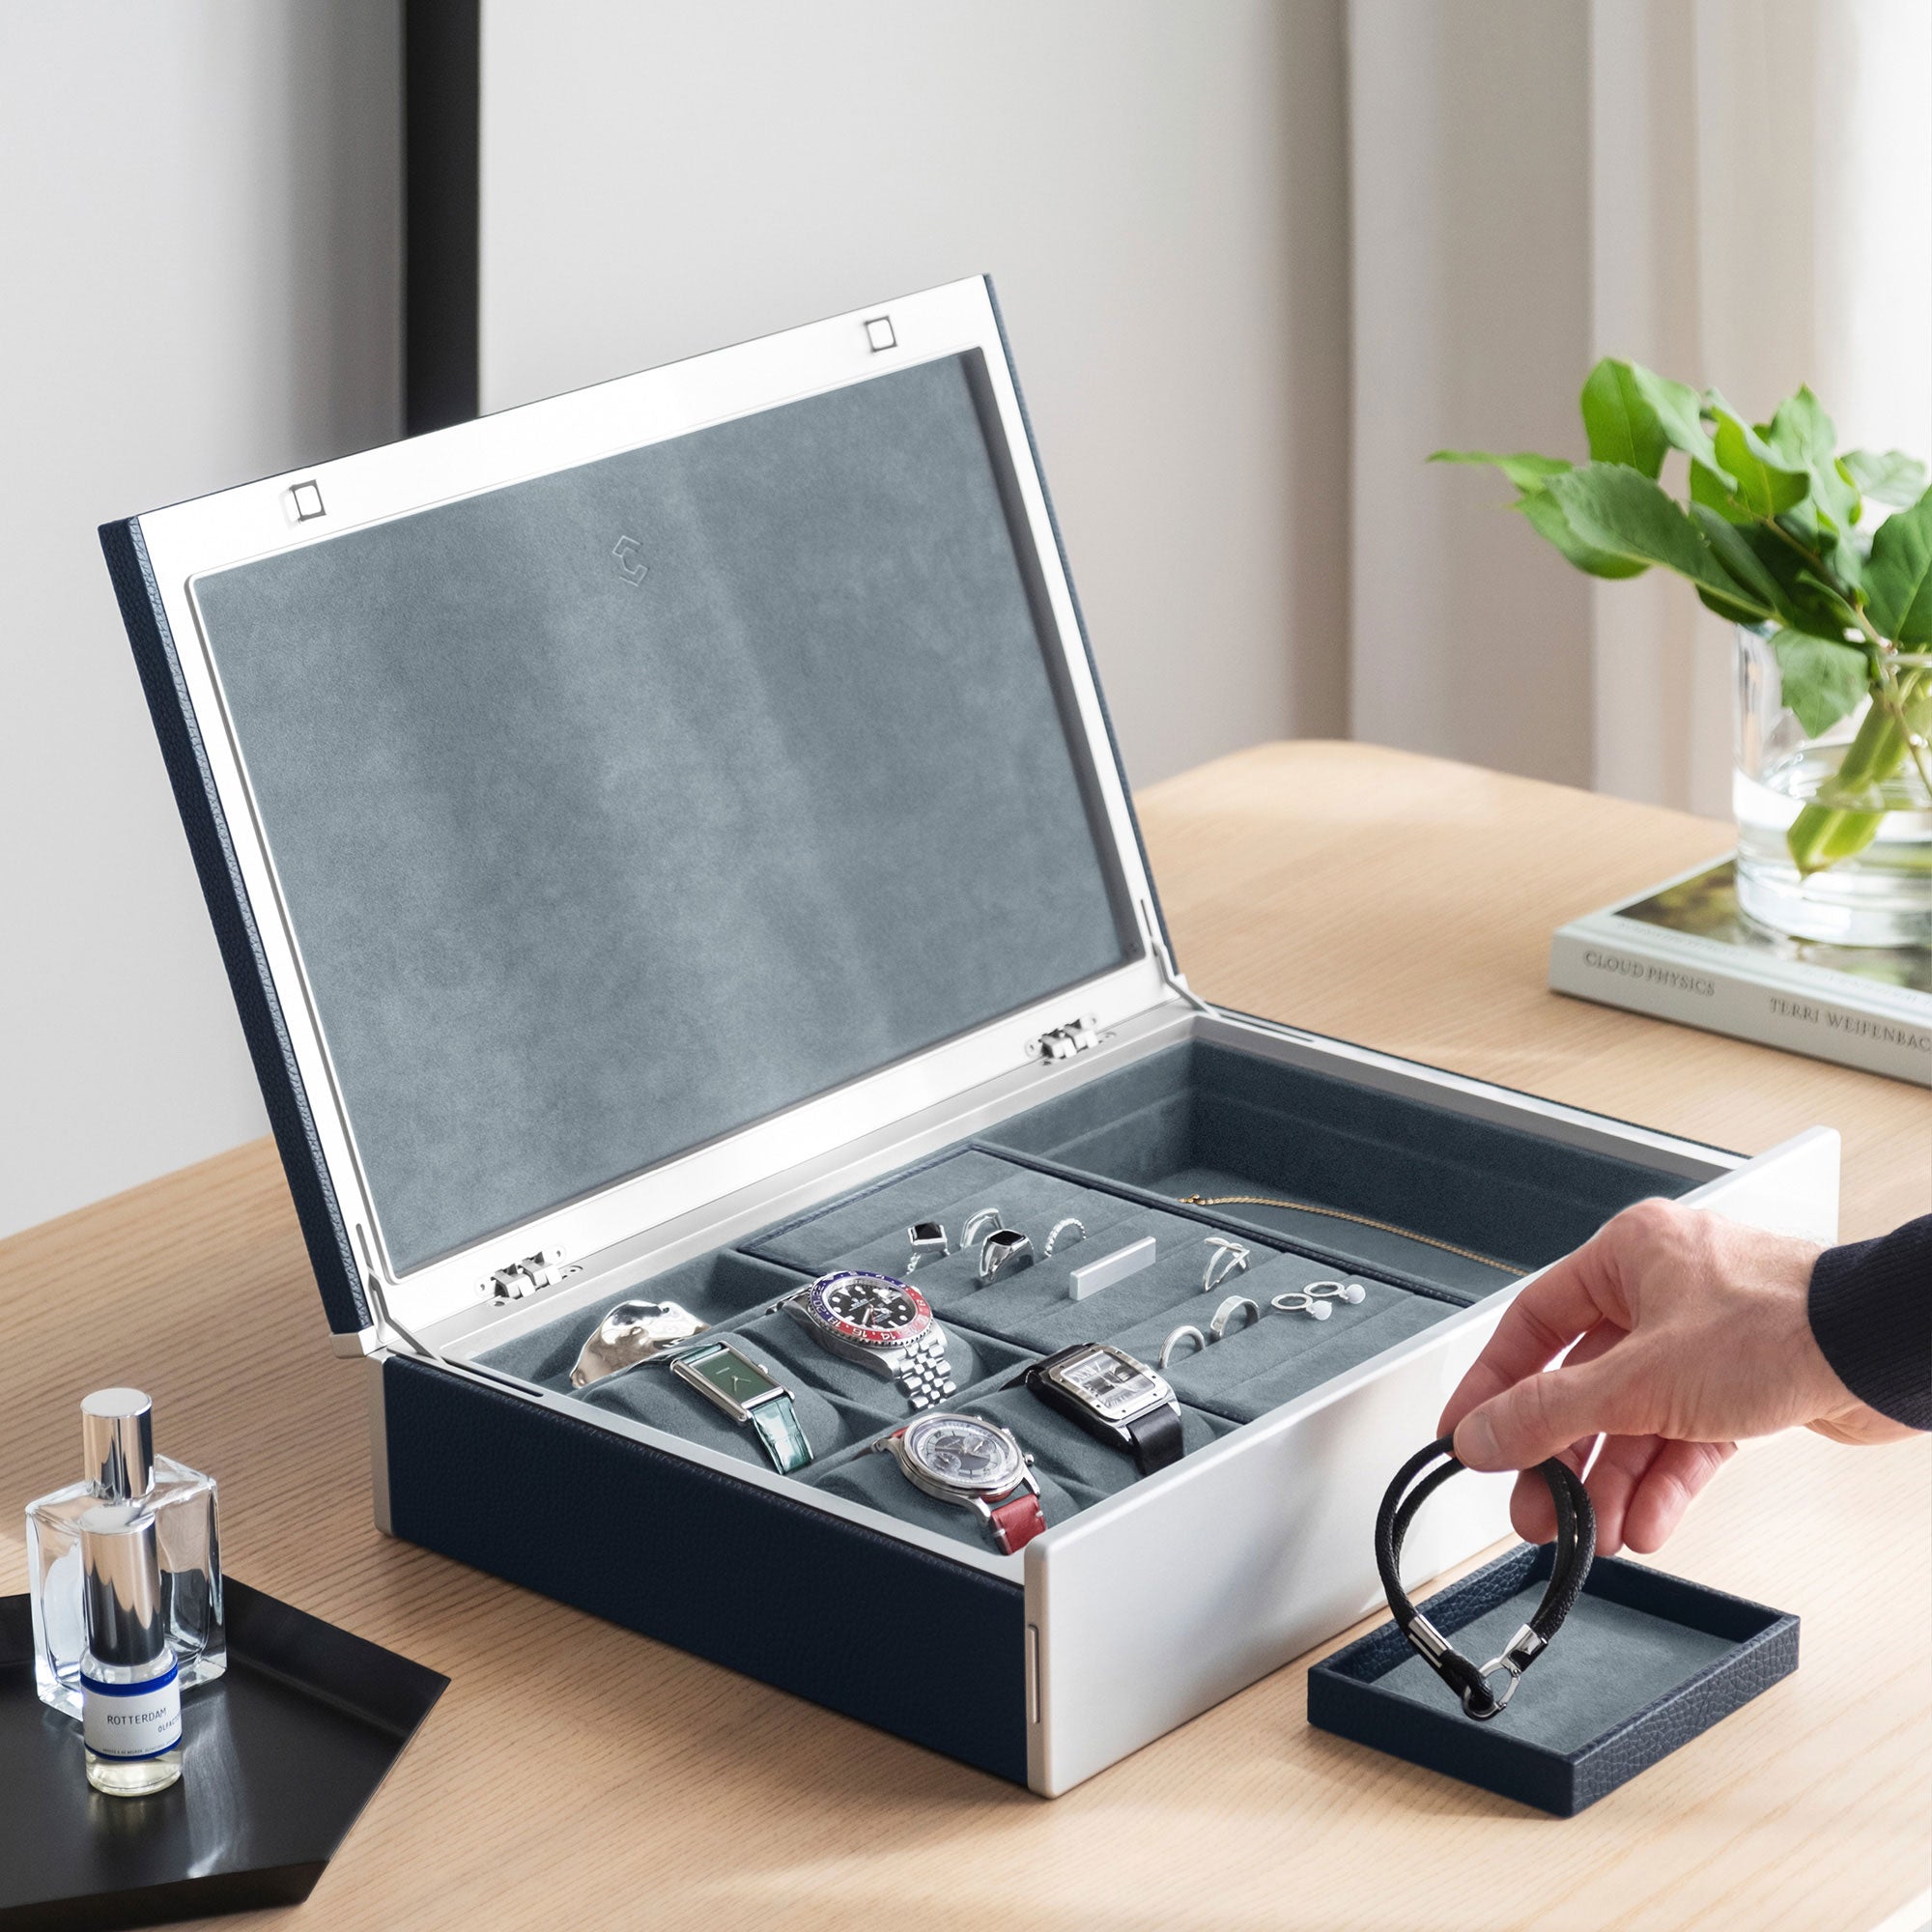 Lifestyle photo of man taking bracelet from removable jewelry tray from the marine leather and smoky blue interior Taylor 4 Watch and Jewelry box. The box is holding 4 watches and fine jewelry, including silver and gold rings and a necklace in a modern apartment setting.